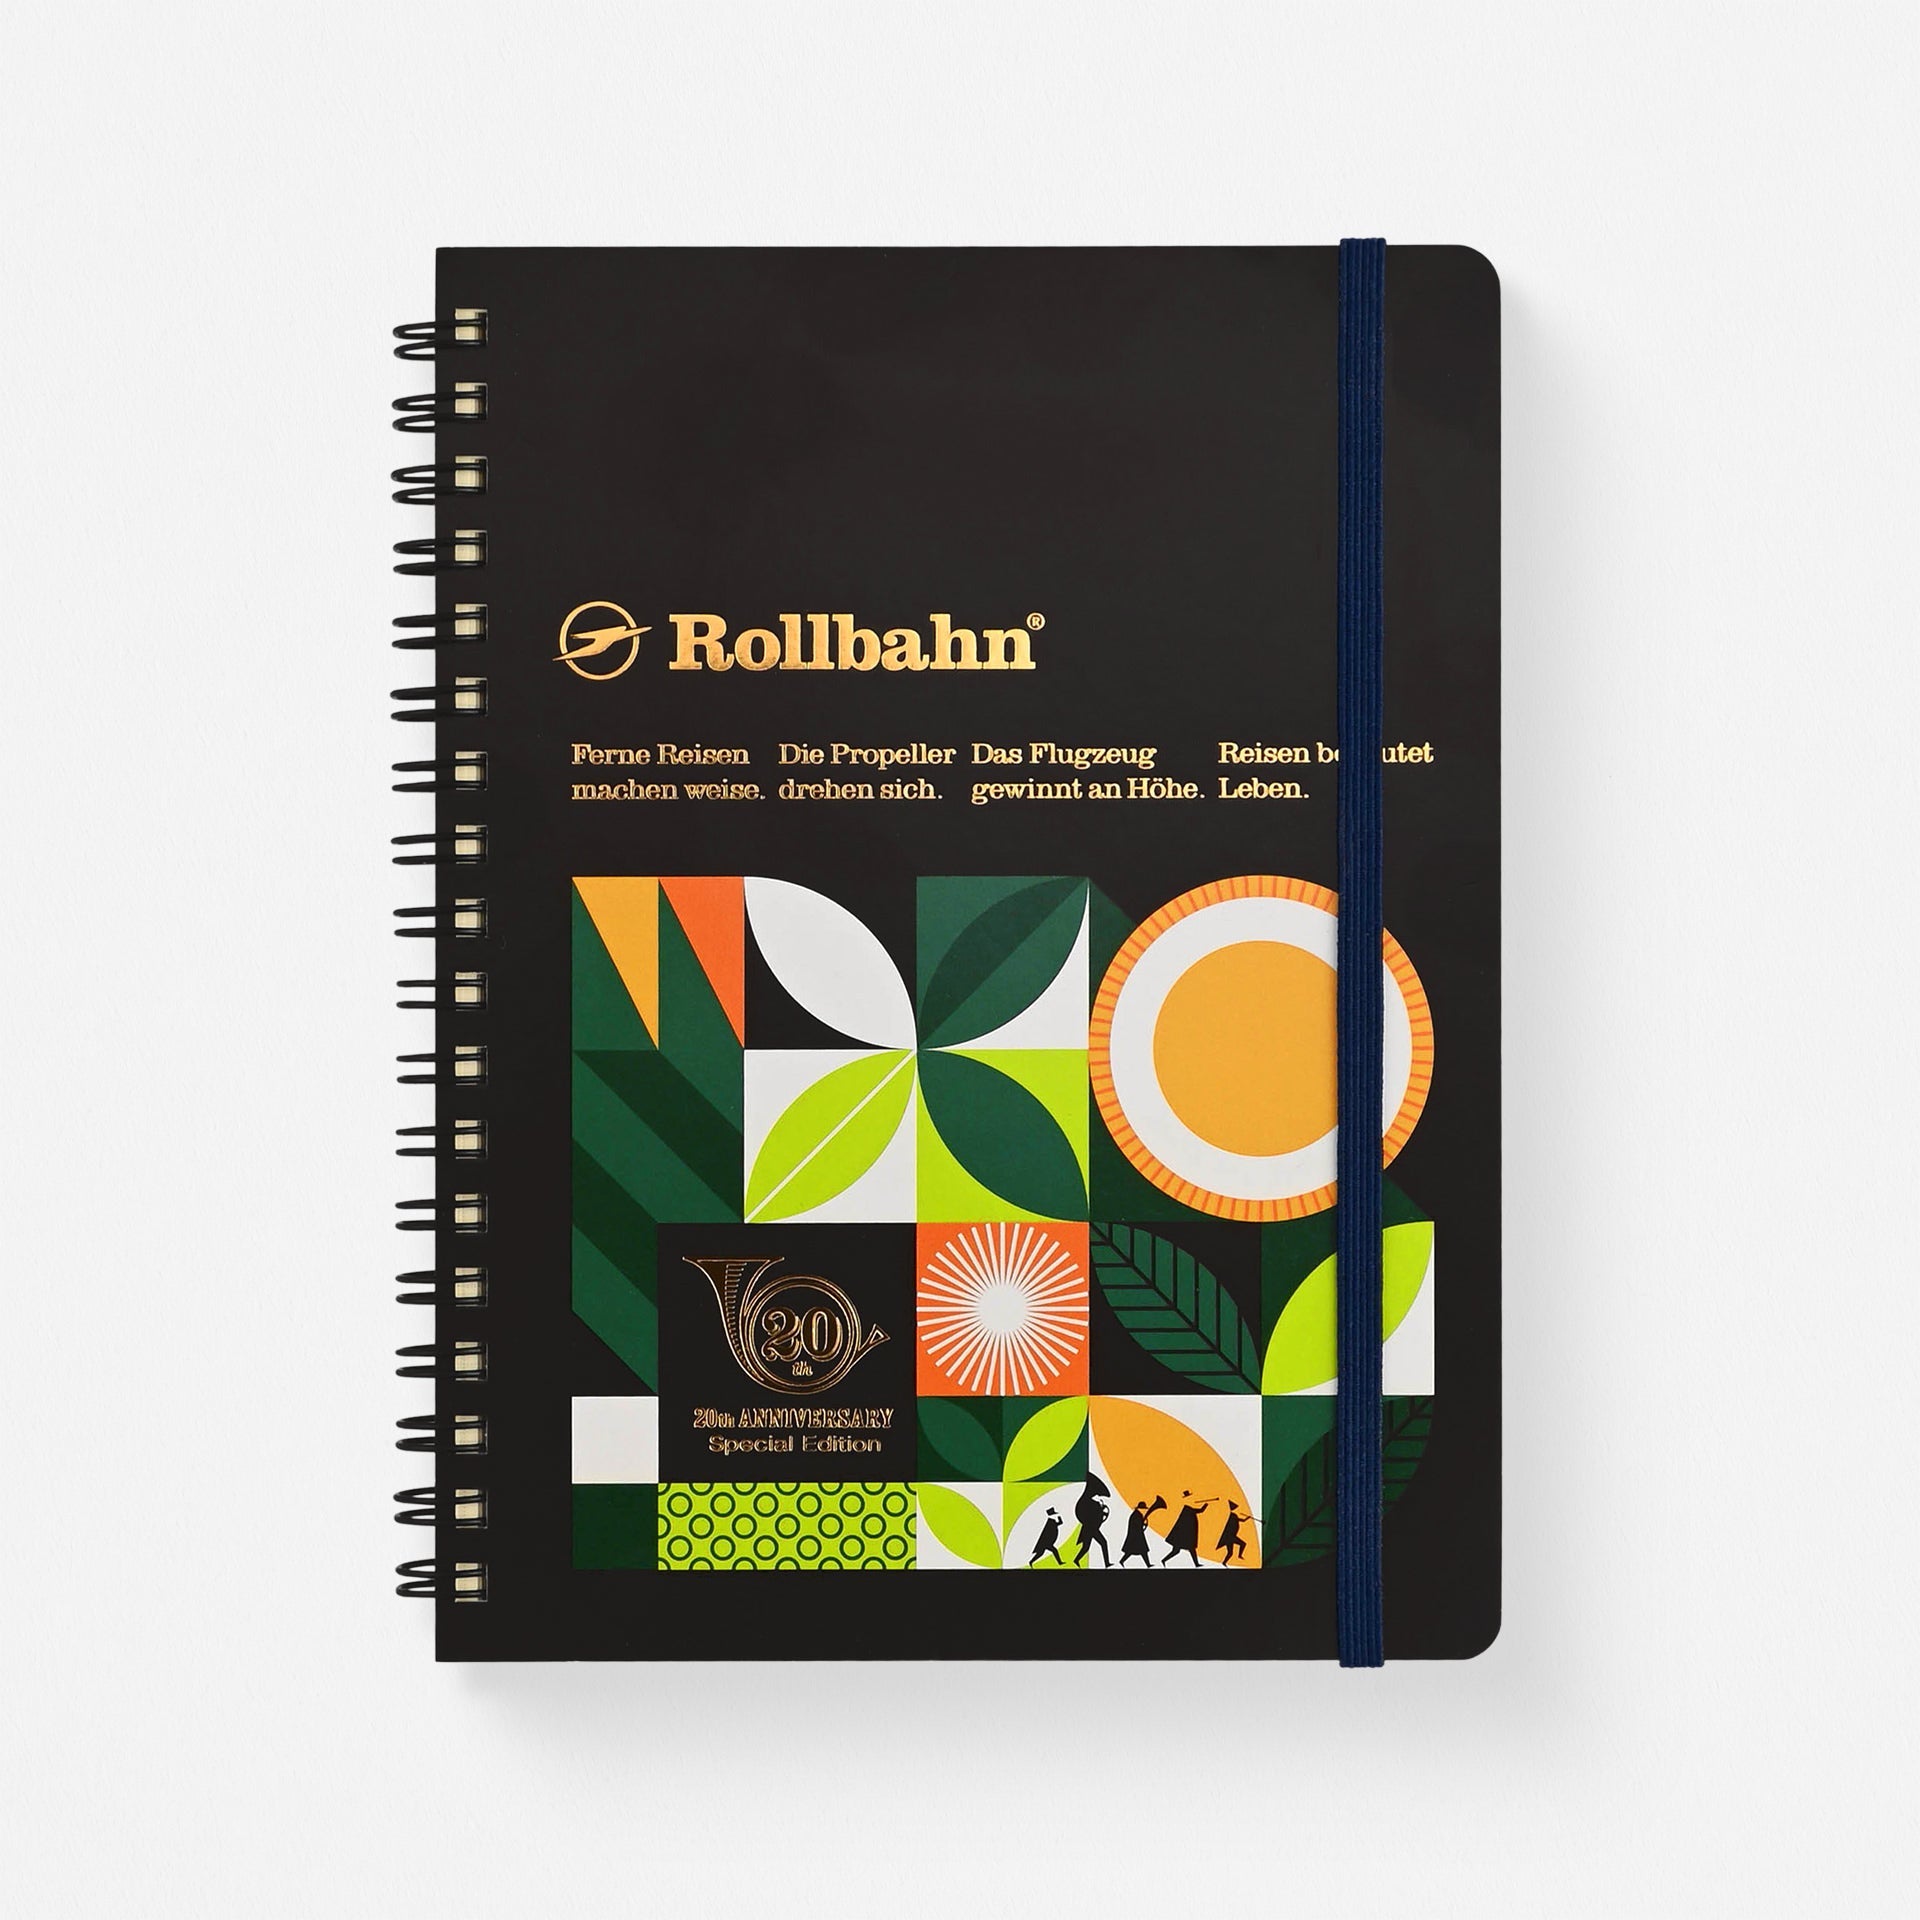 Delfonics Rollbahn Parade  Limited Edition 20th Anniversary Notebook "Landscape" 